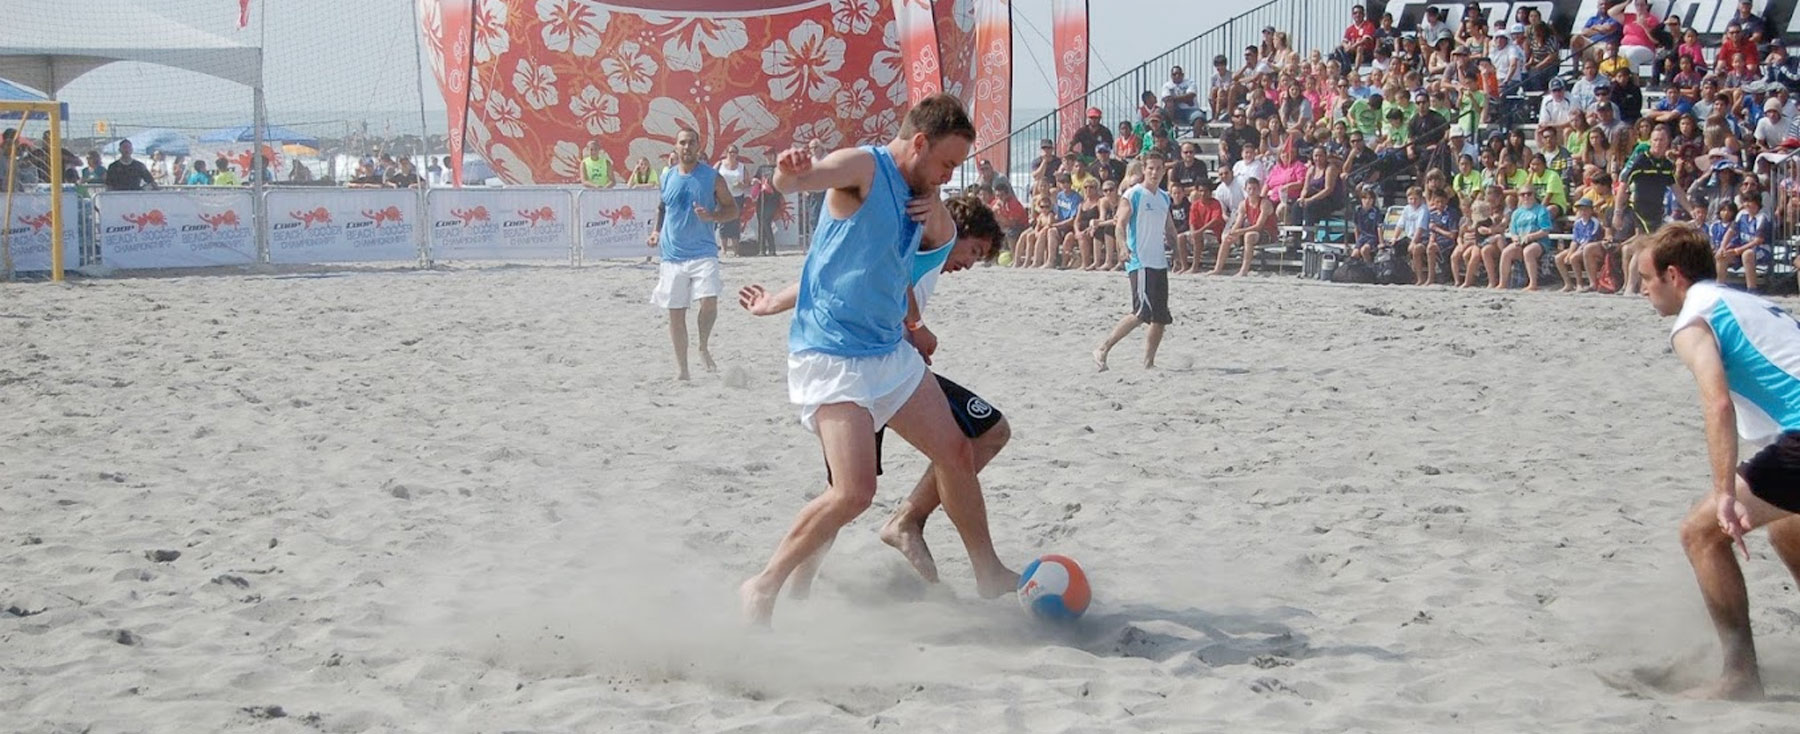 The Beach Soccer Championships